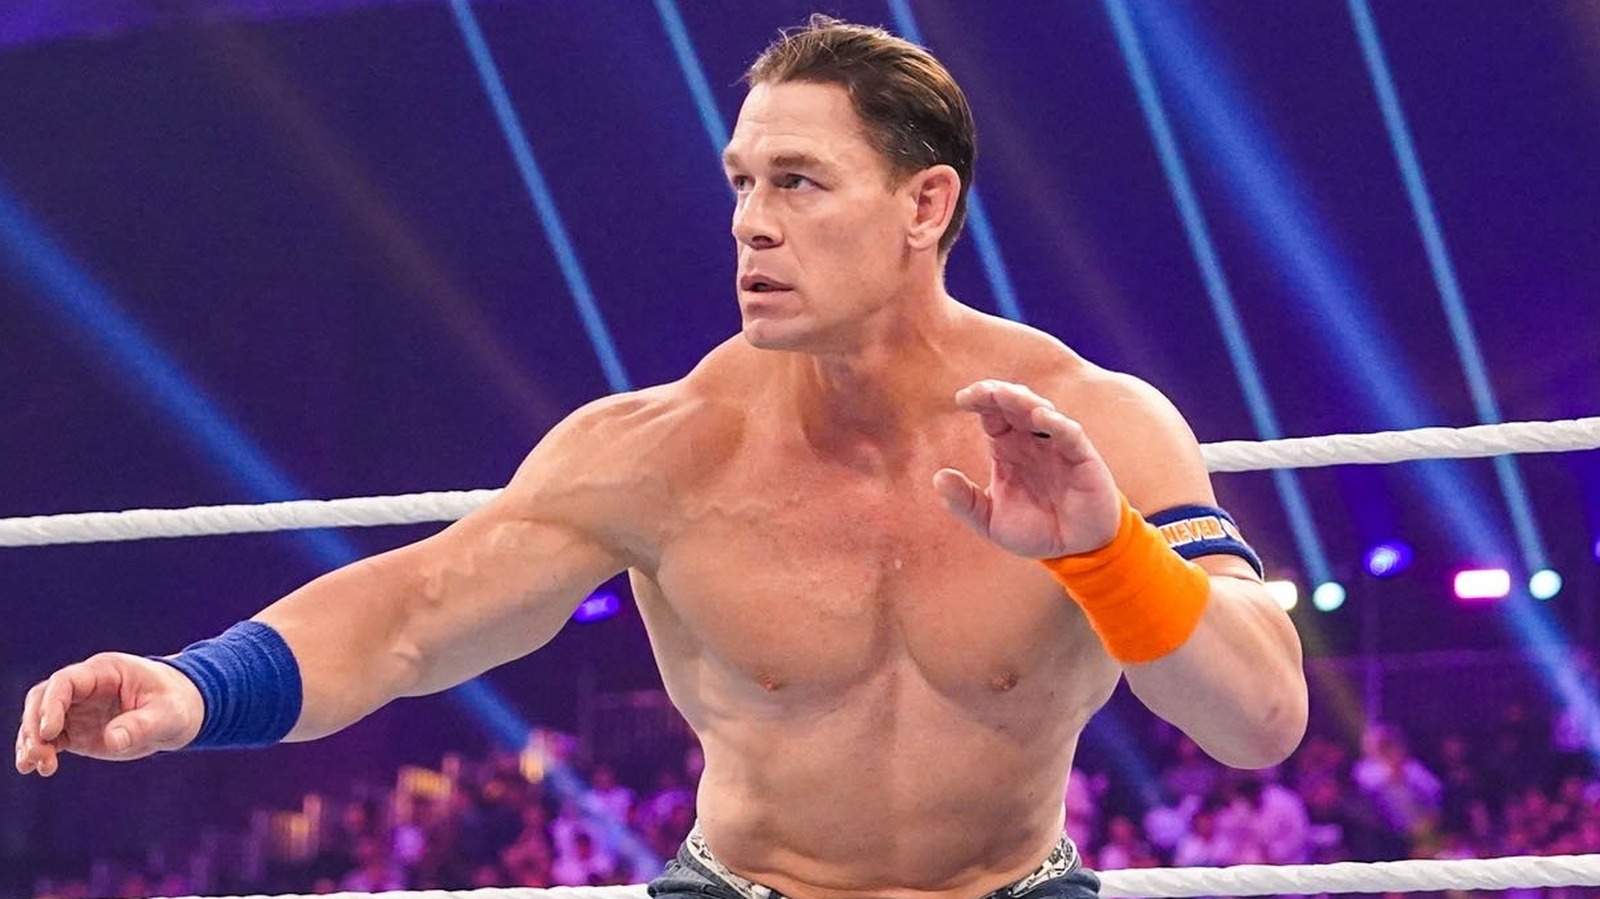 WWE Exec Bruce Prichard Lays Out Why John Cena Is 'The Man'